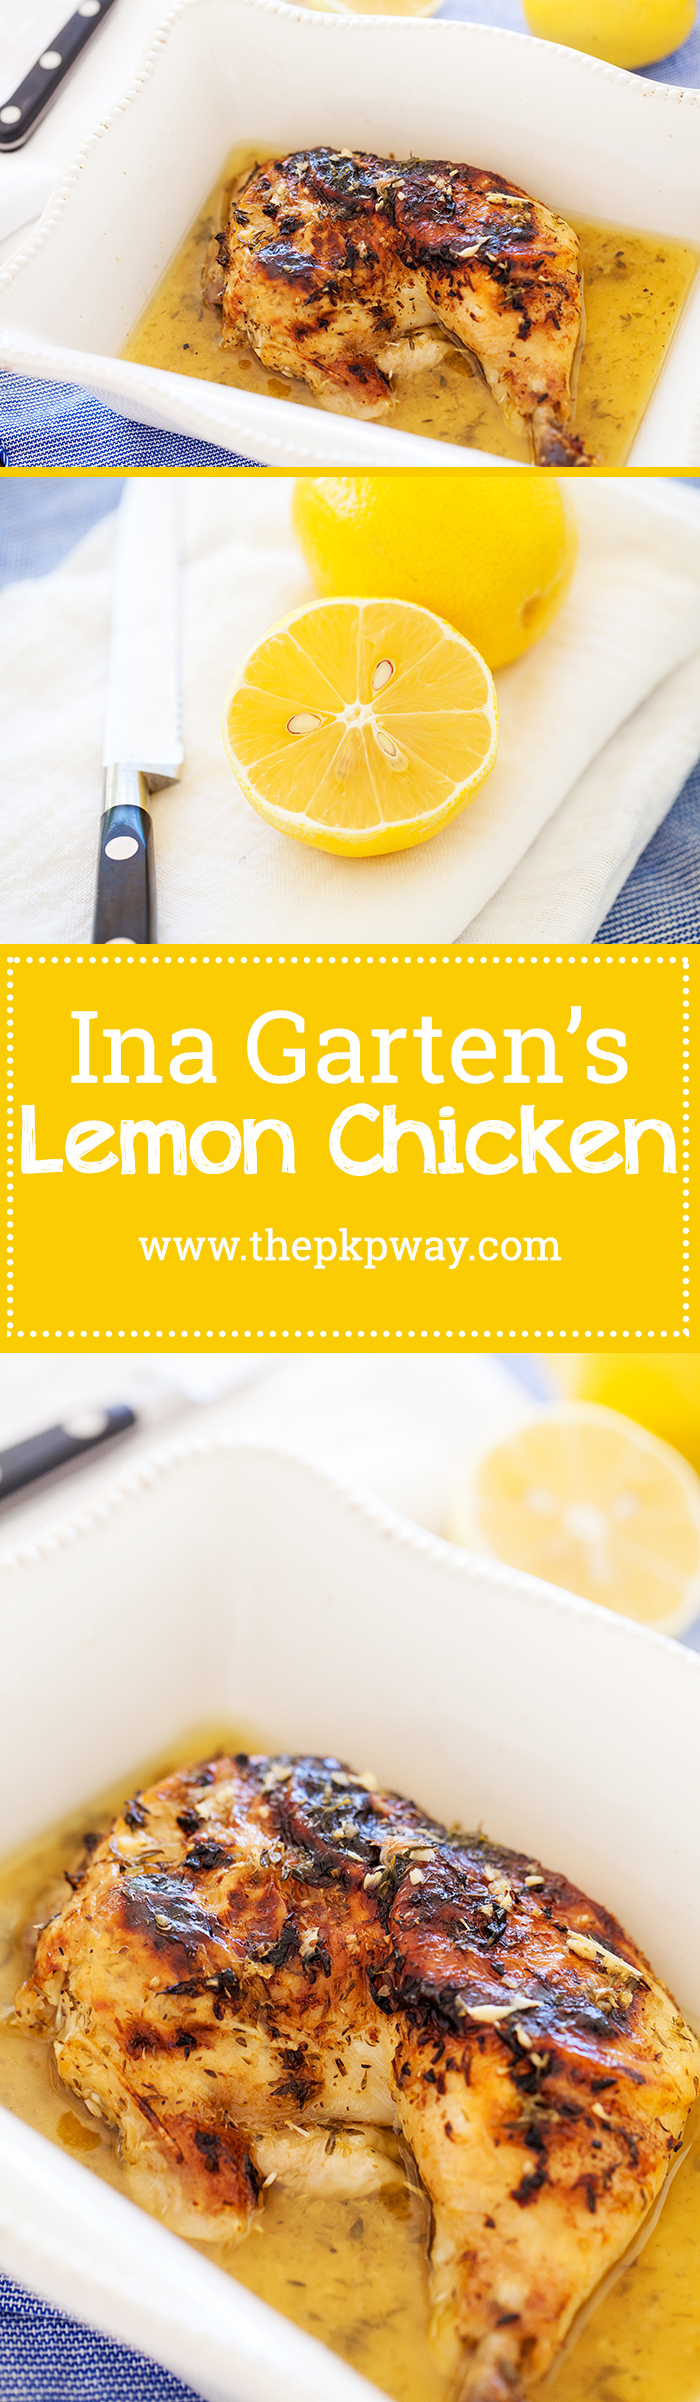 Ina's lemon chicken is a no fuss dish that's comforting, familiar, and utterly satisfying. Make ahead of time or right before serving.